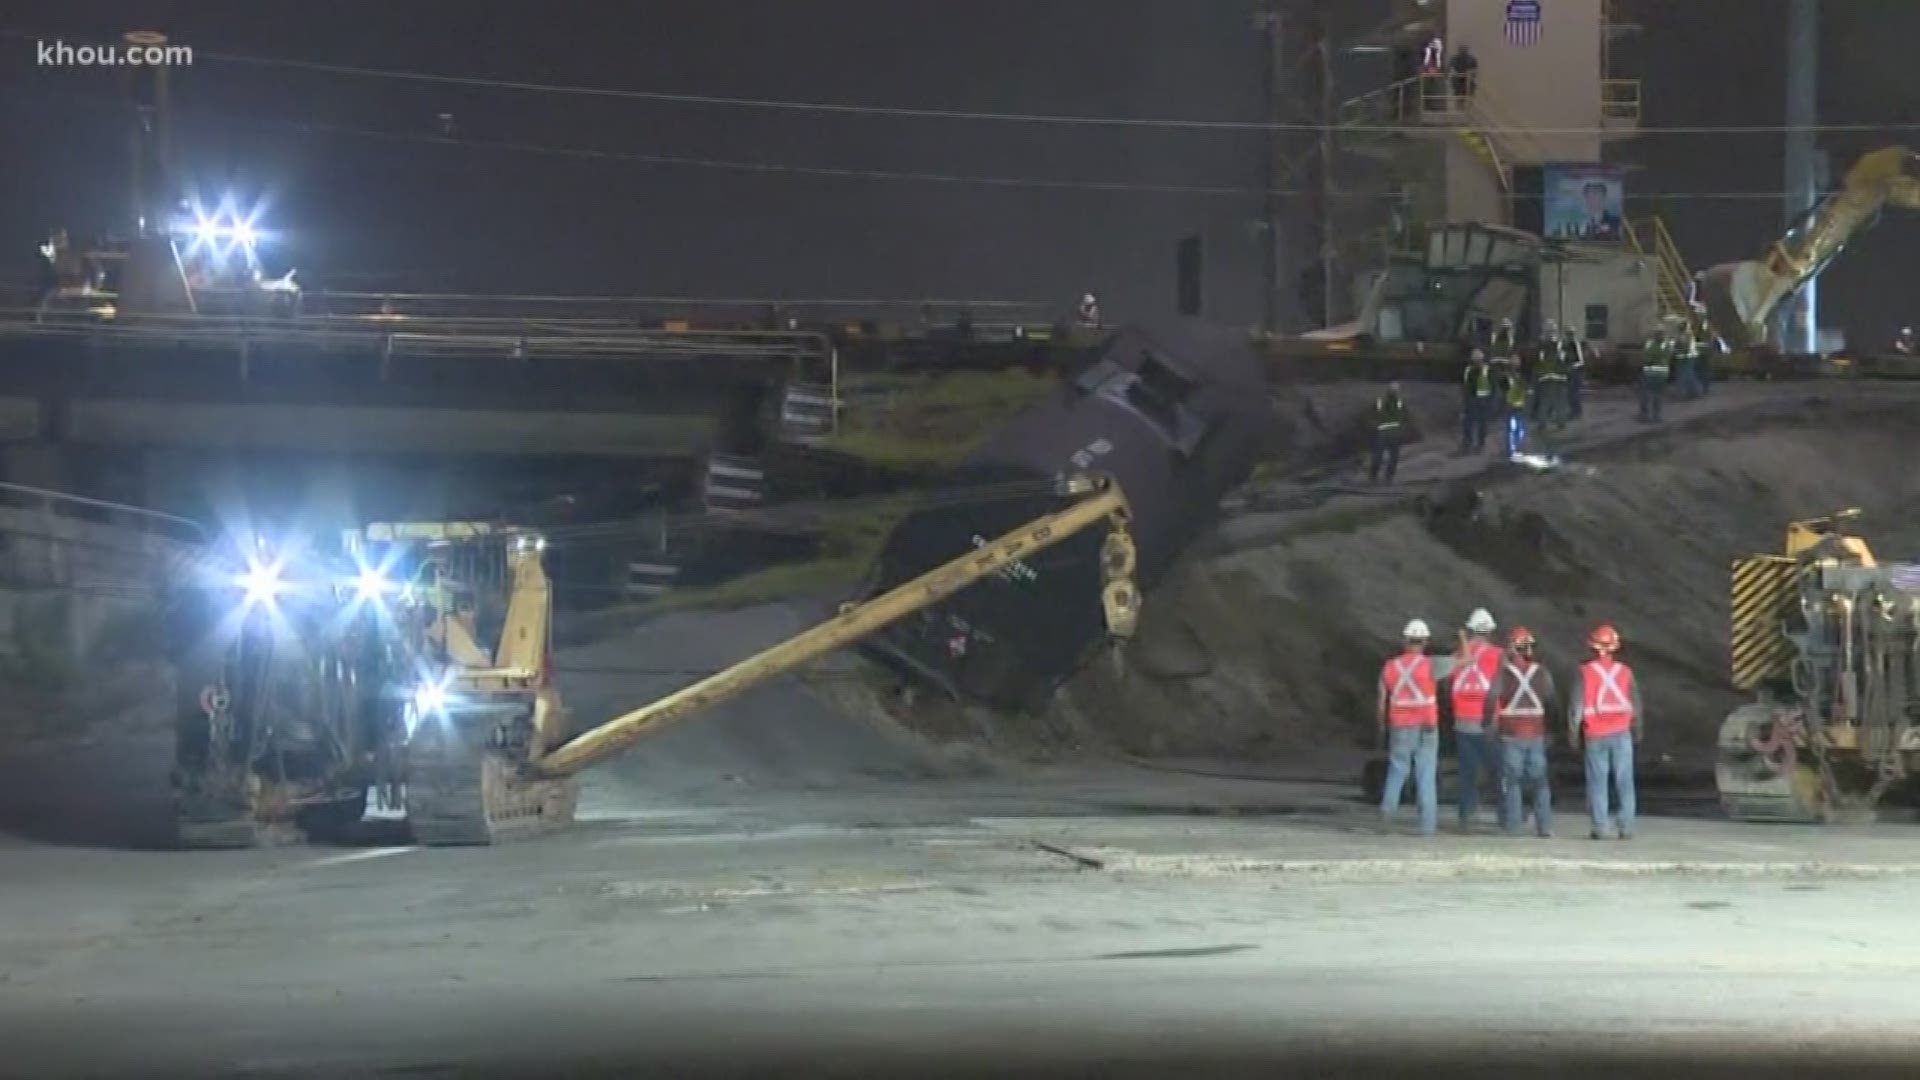 Crews worked to clear the scene of a train derailment at Wayside Drive and Liberty on northeast Houston overnight.